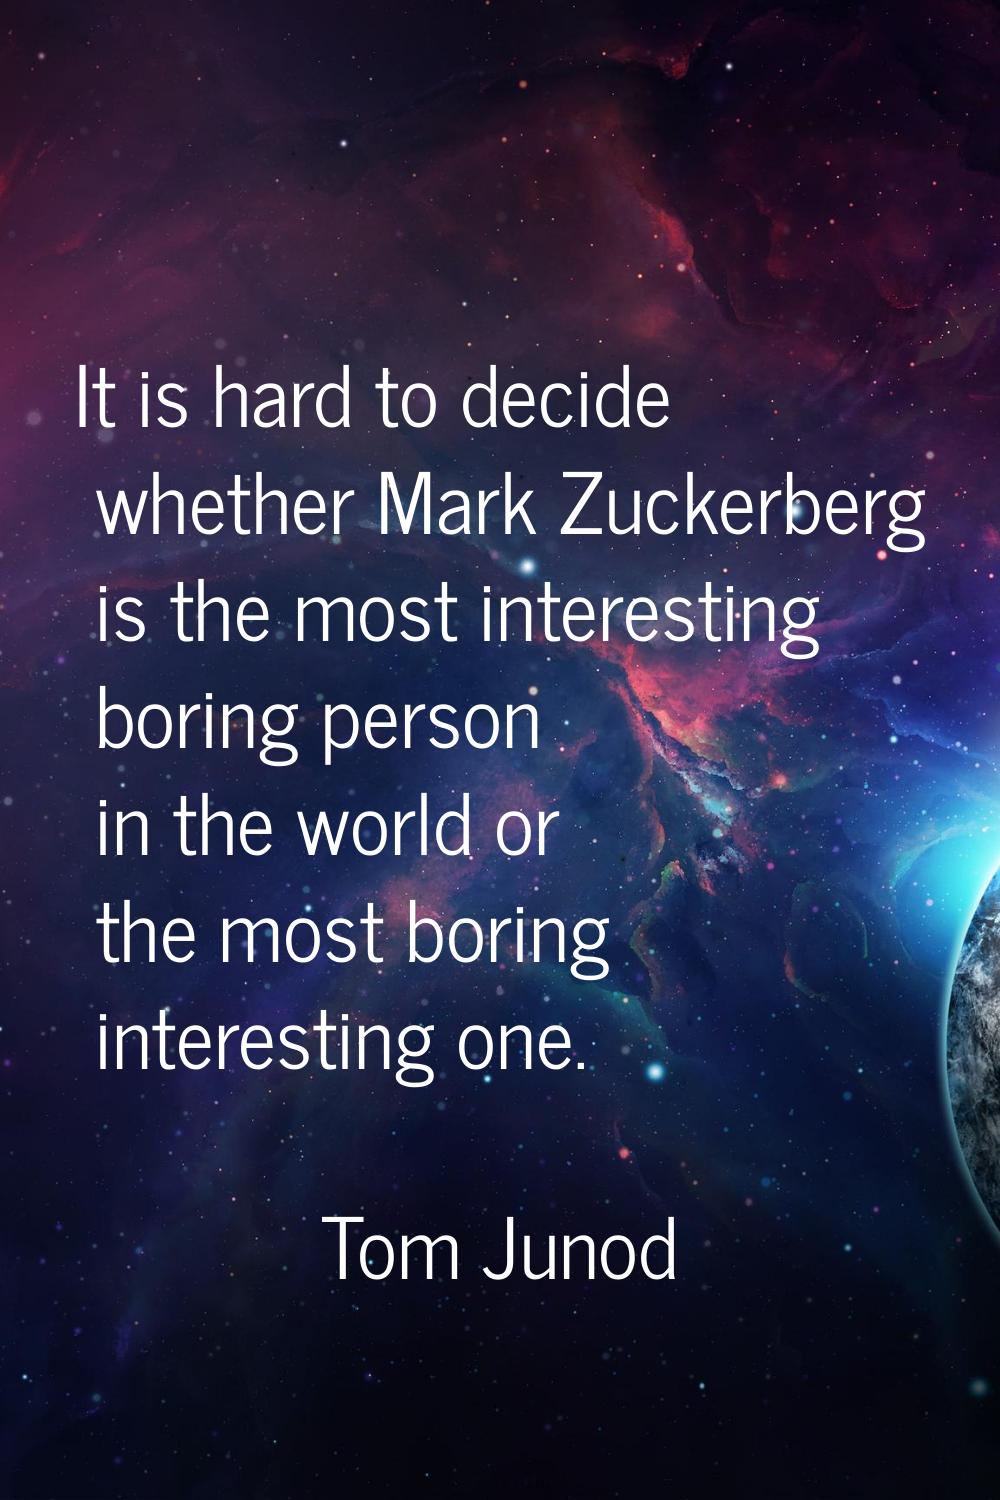 It is hard to decide whether Mark Zuckerberg is the most interesting boring person in the world or 